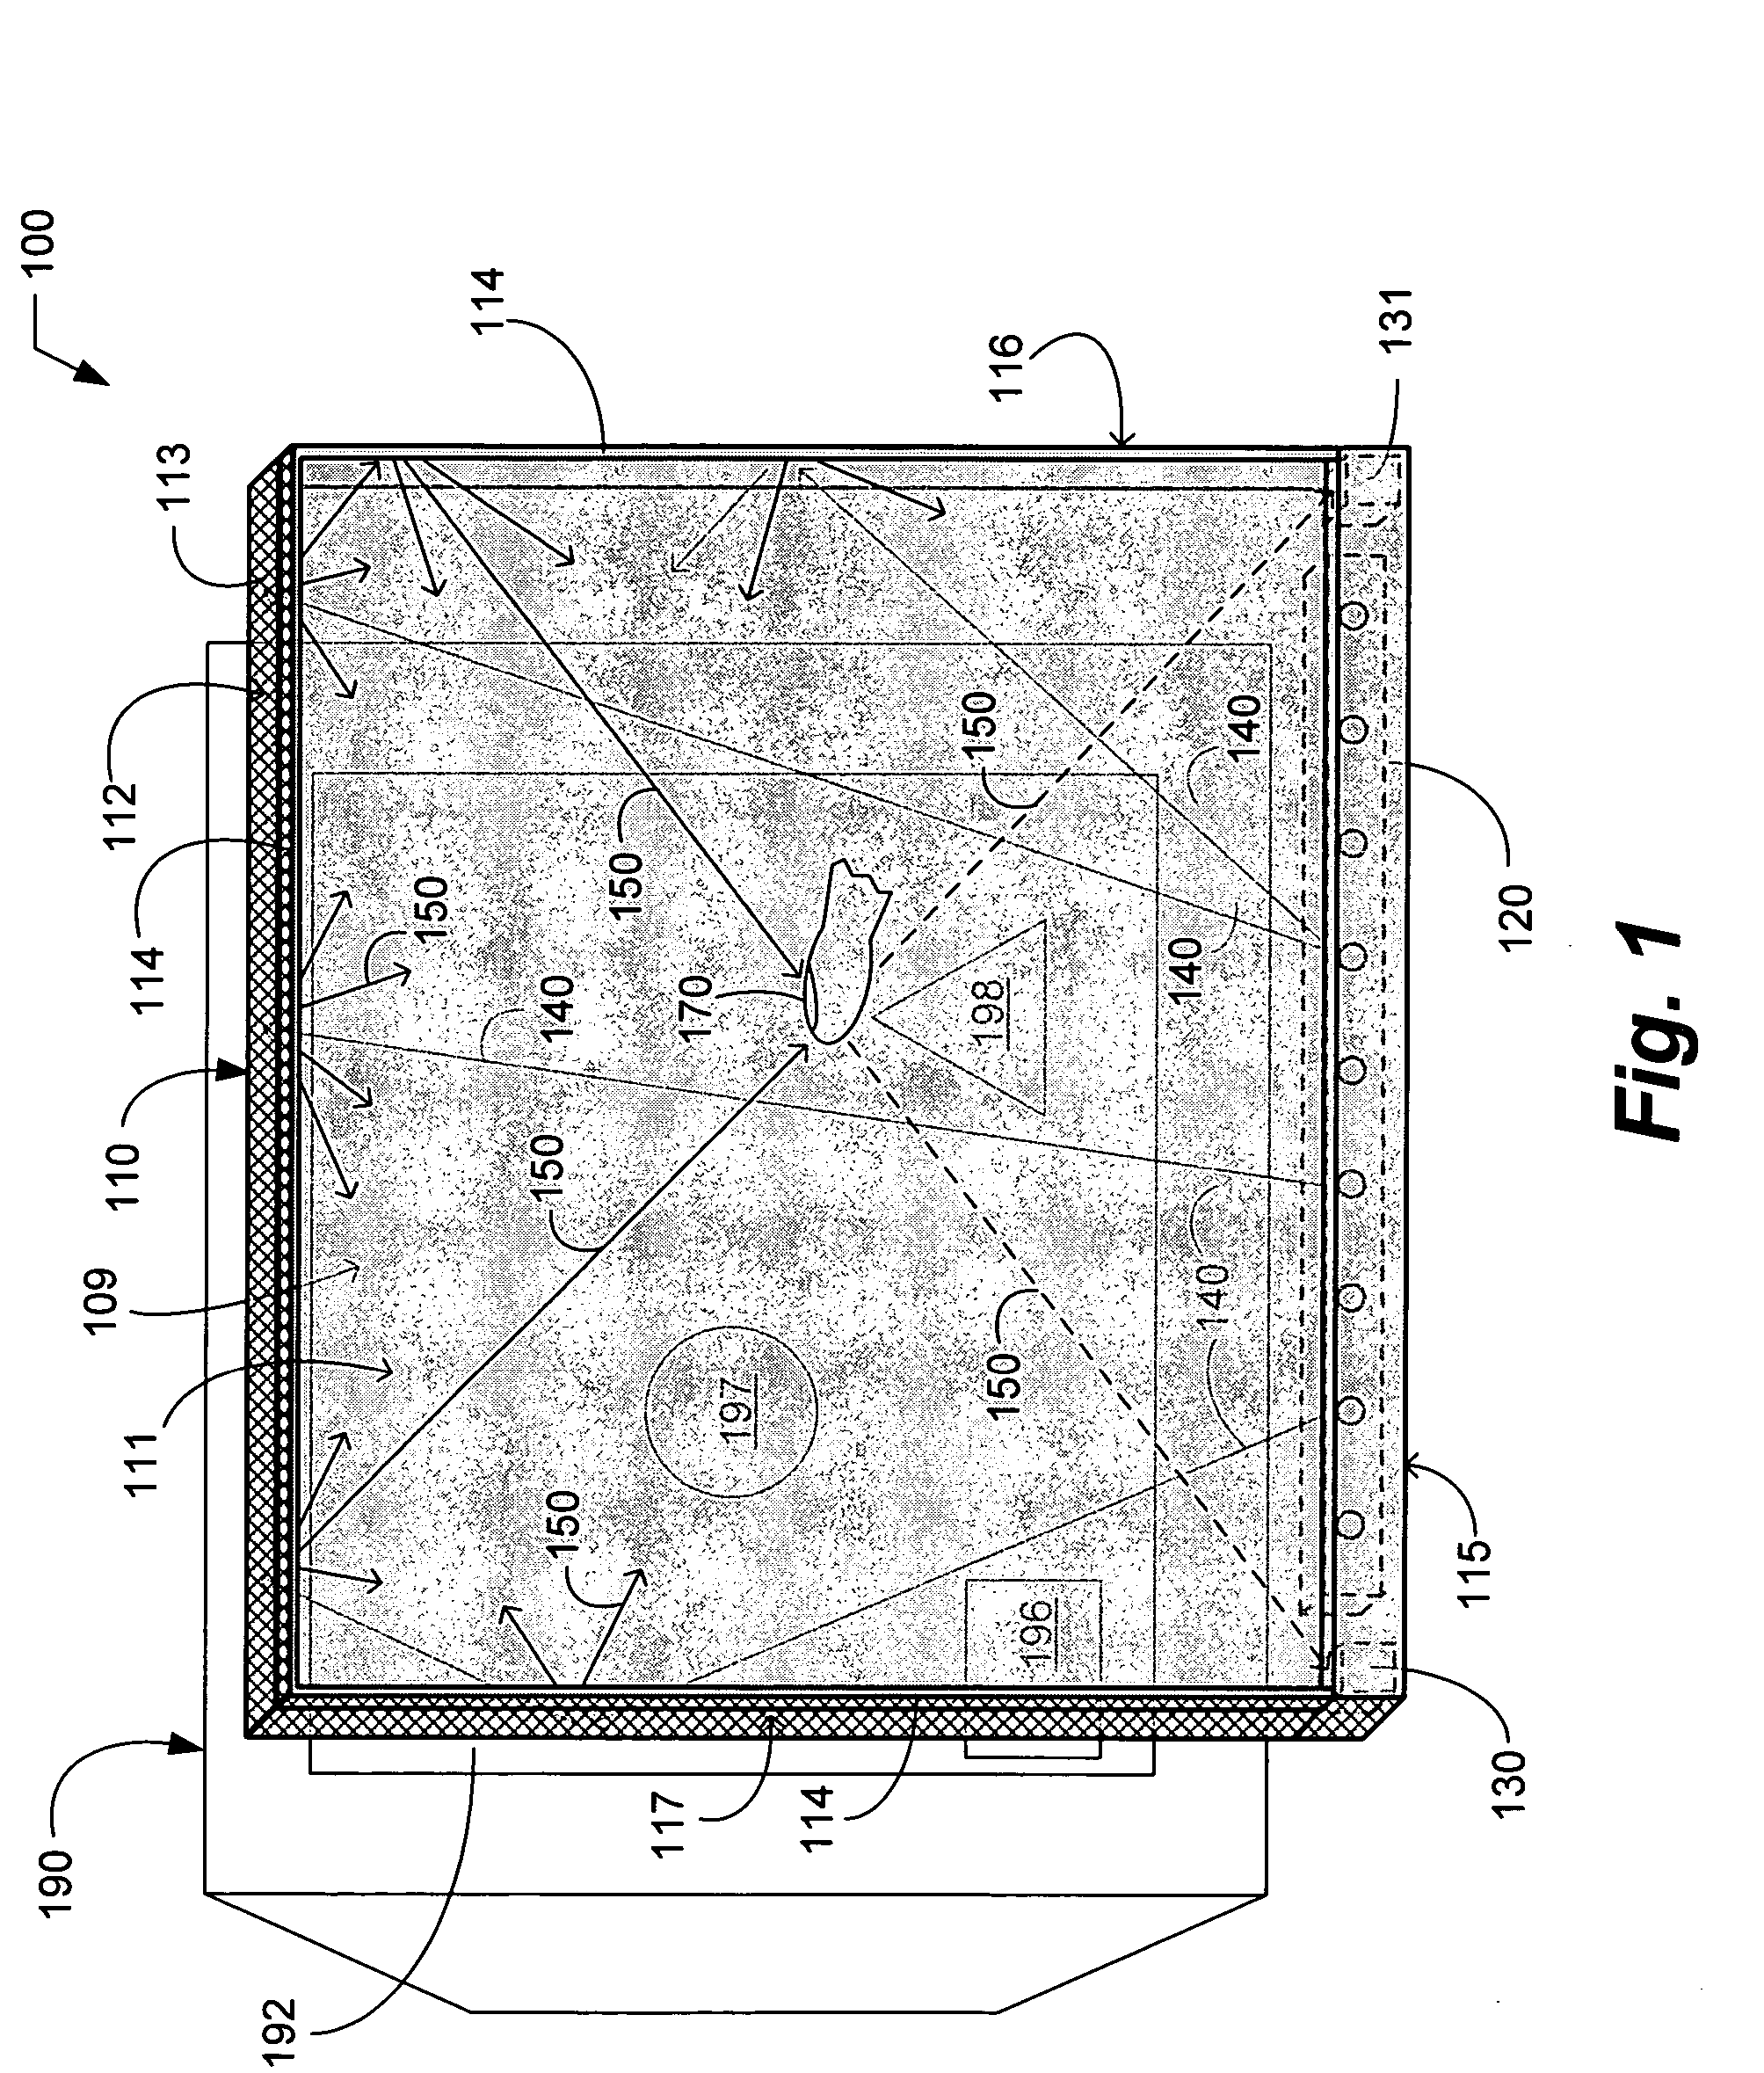 Touch panel display system with illumination and detection provided from a single edge